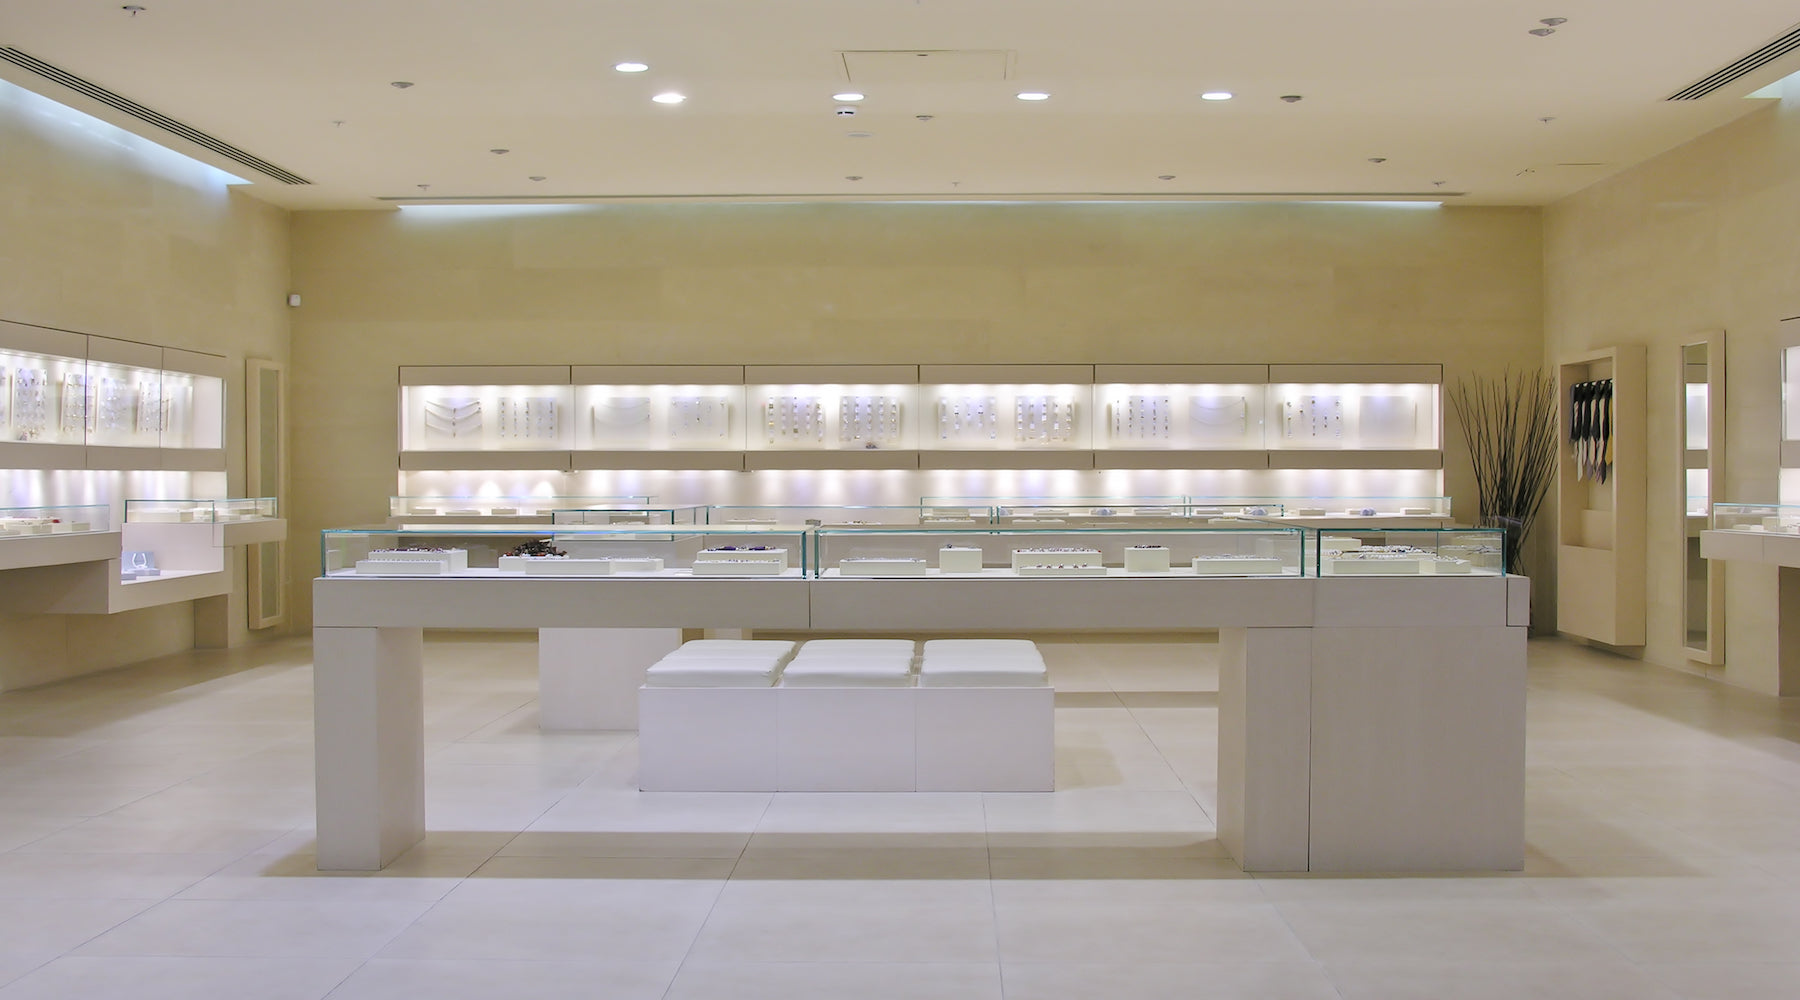 Display cabinet lighting installed inside of a jewelry shop